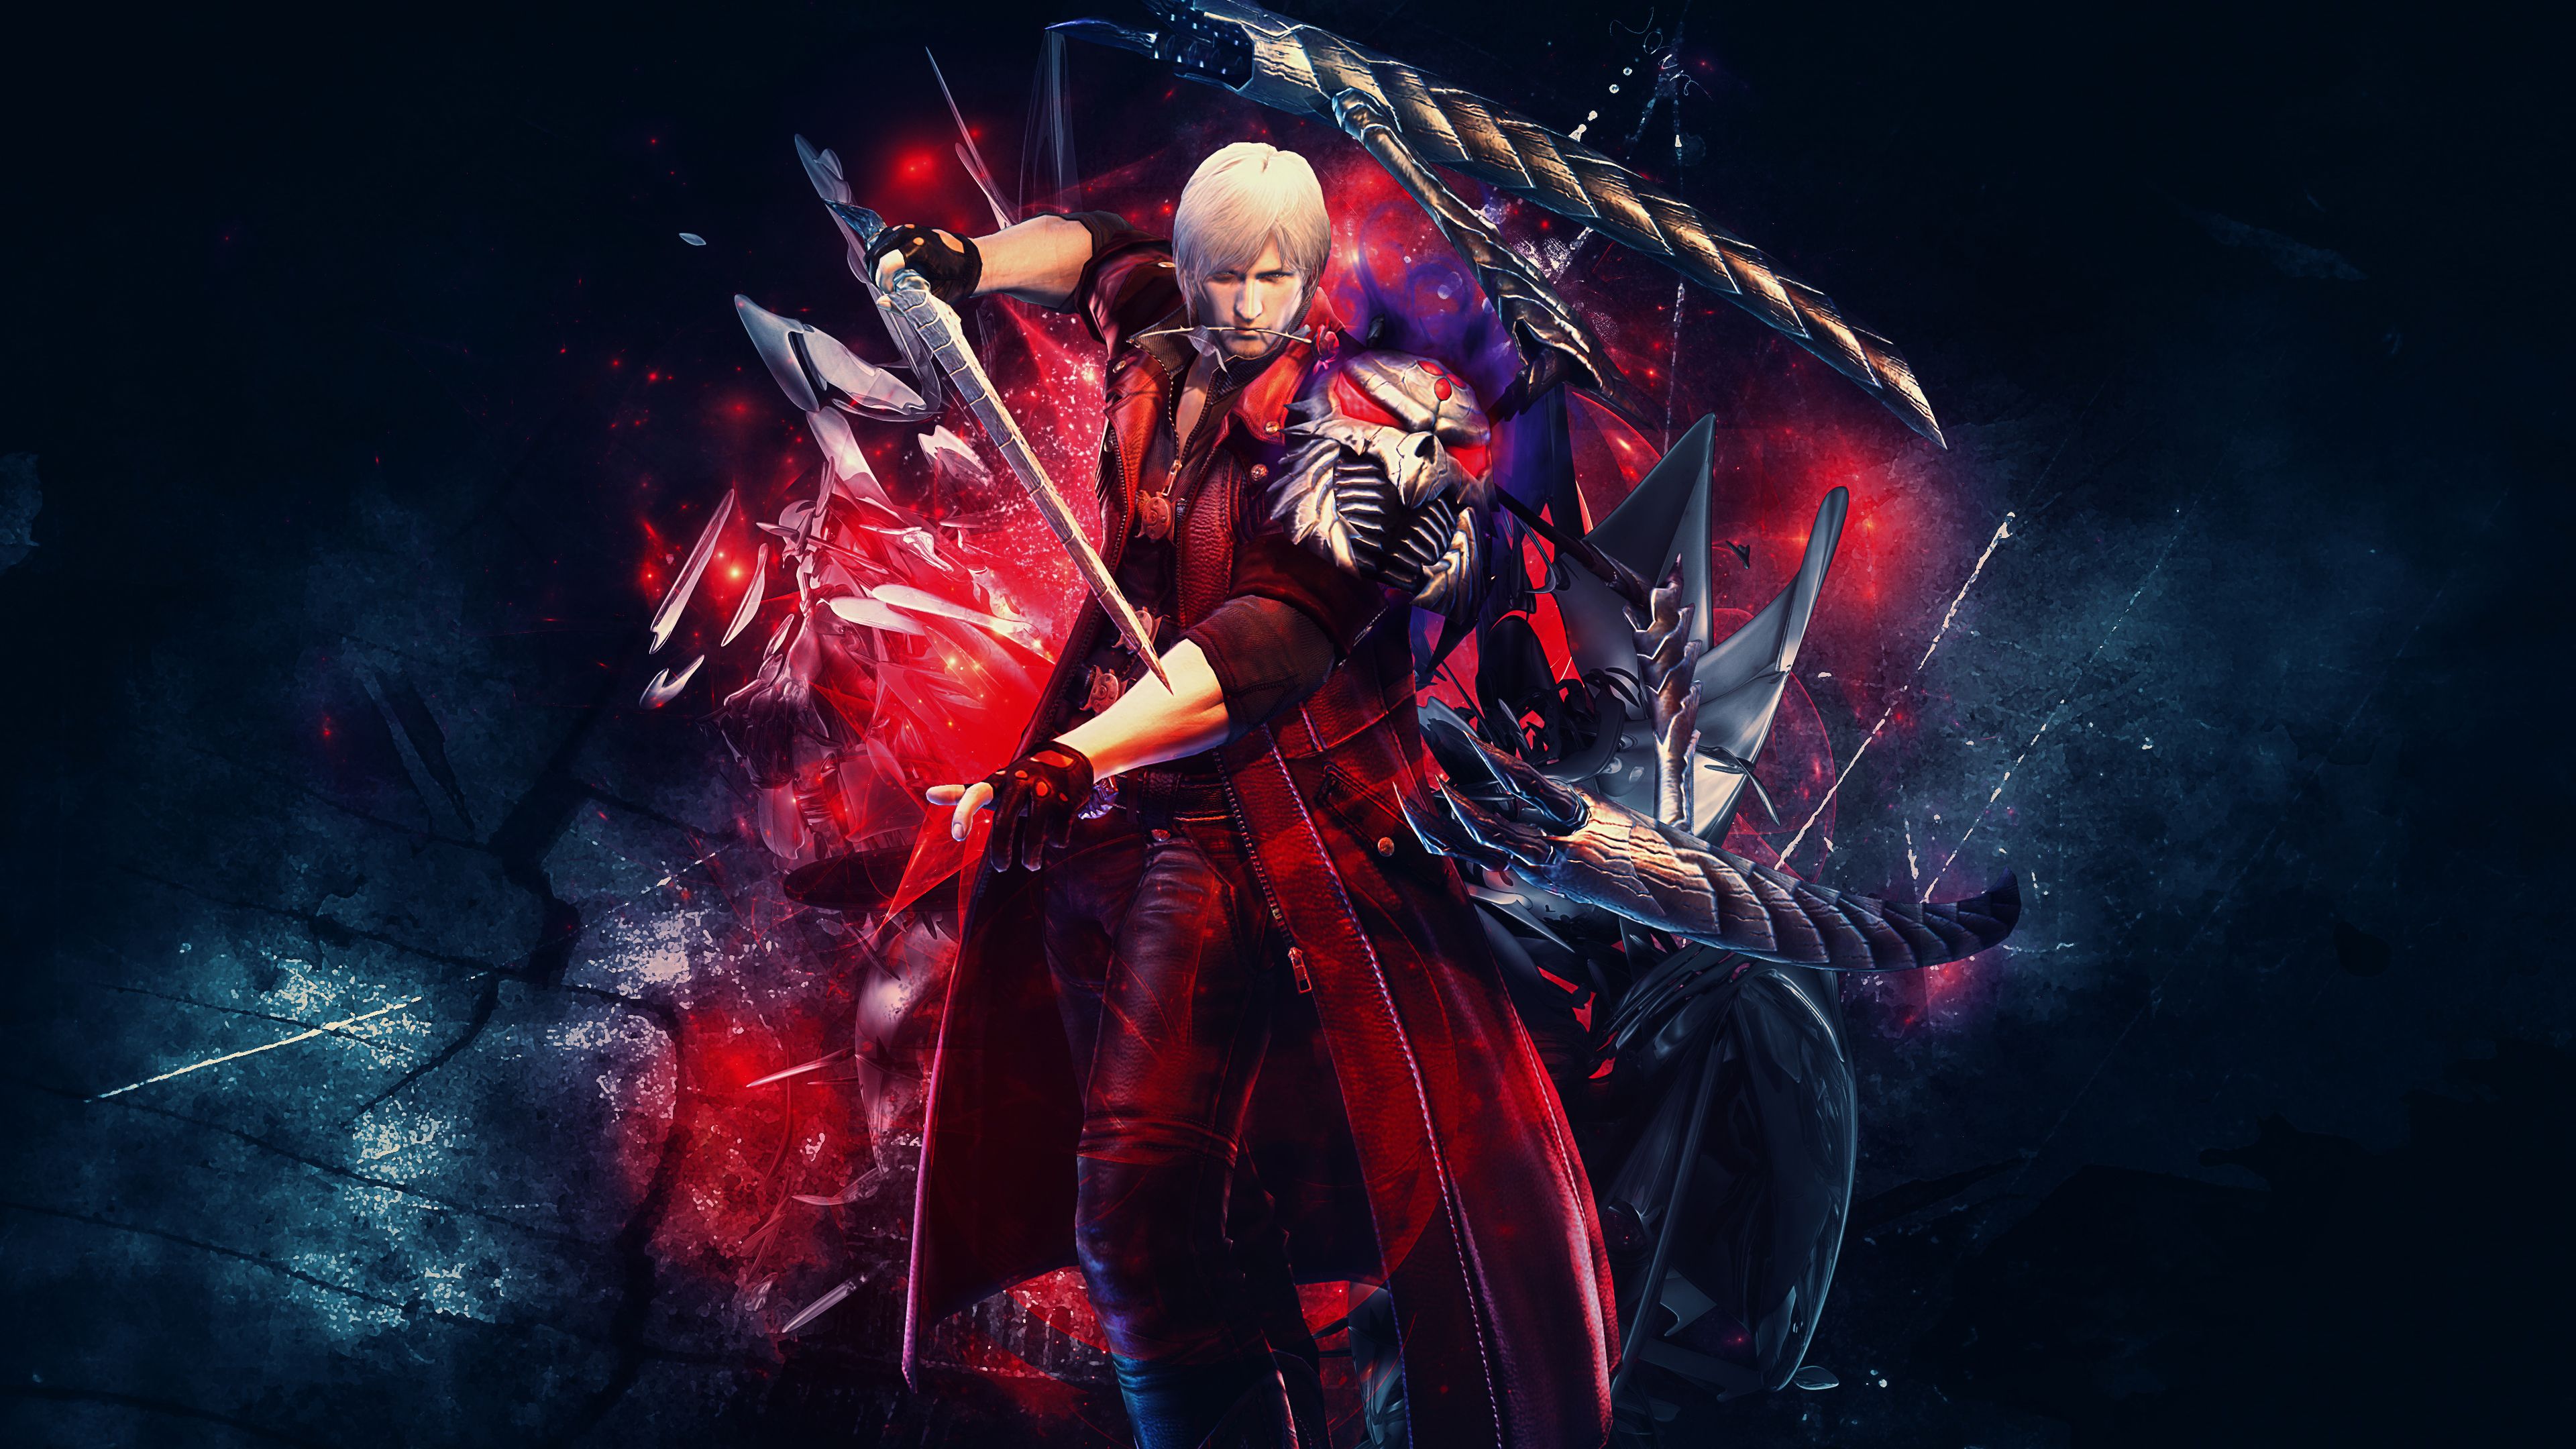 Devil May Cry 4 Special Edition Dante 4k Wallpaper SyanArt Station